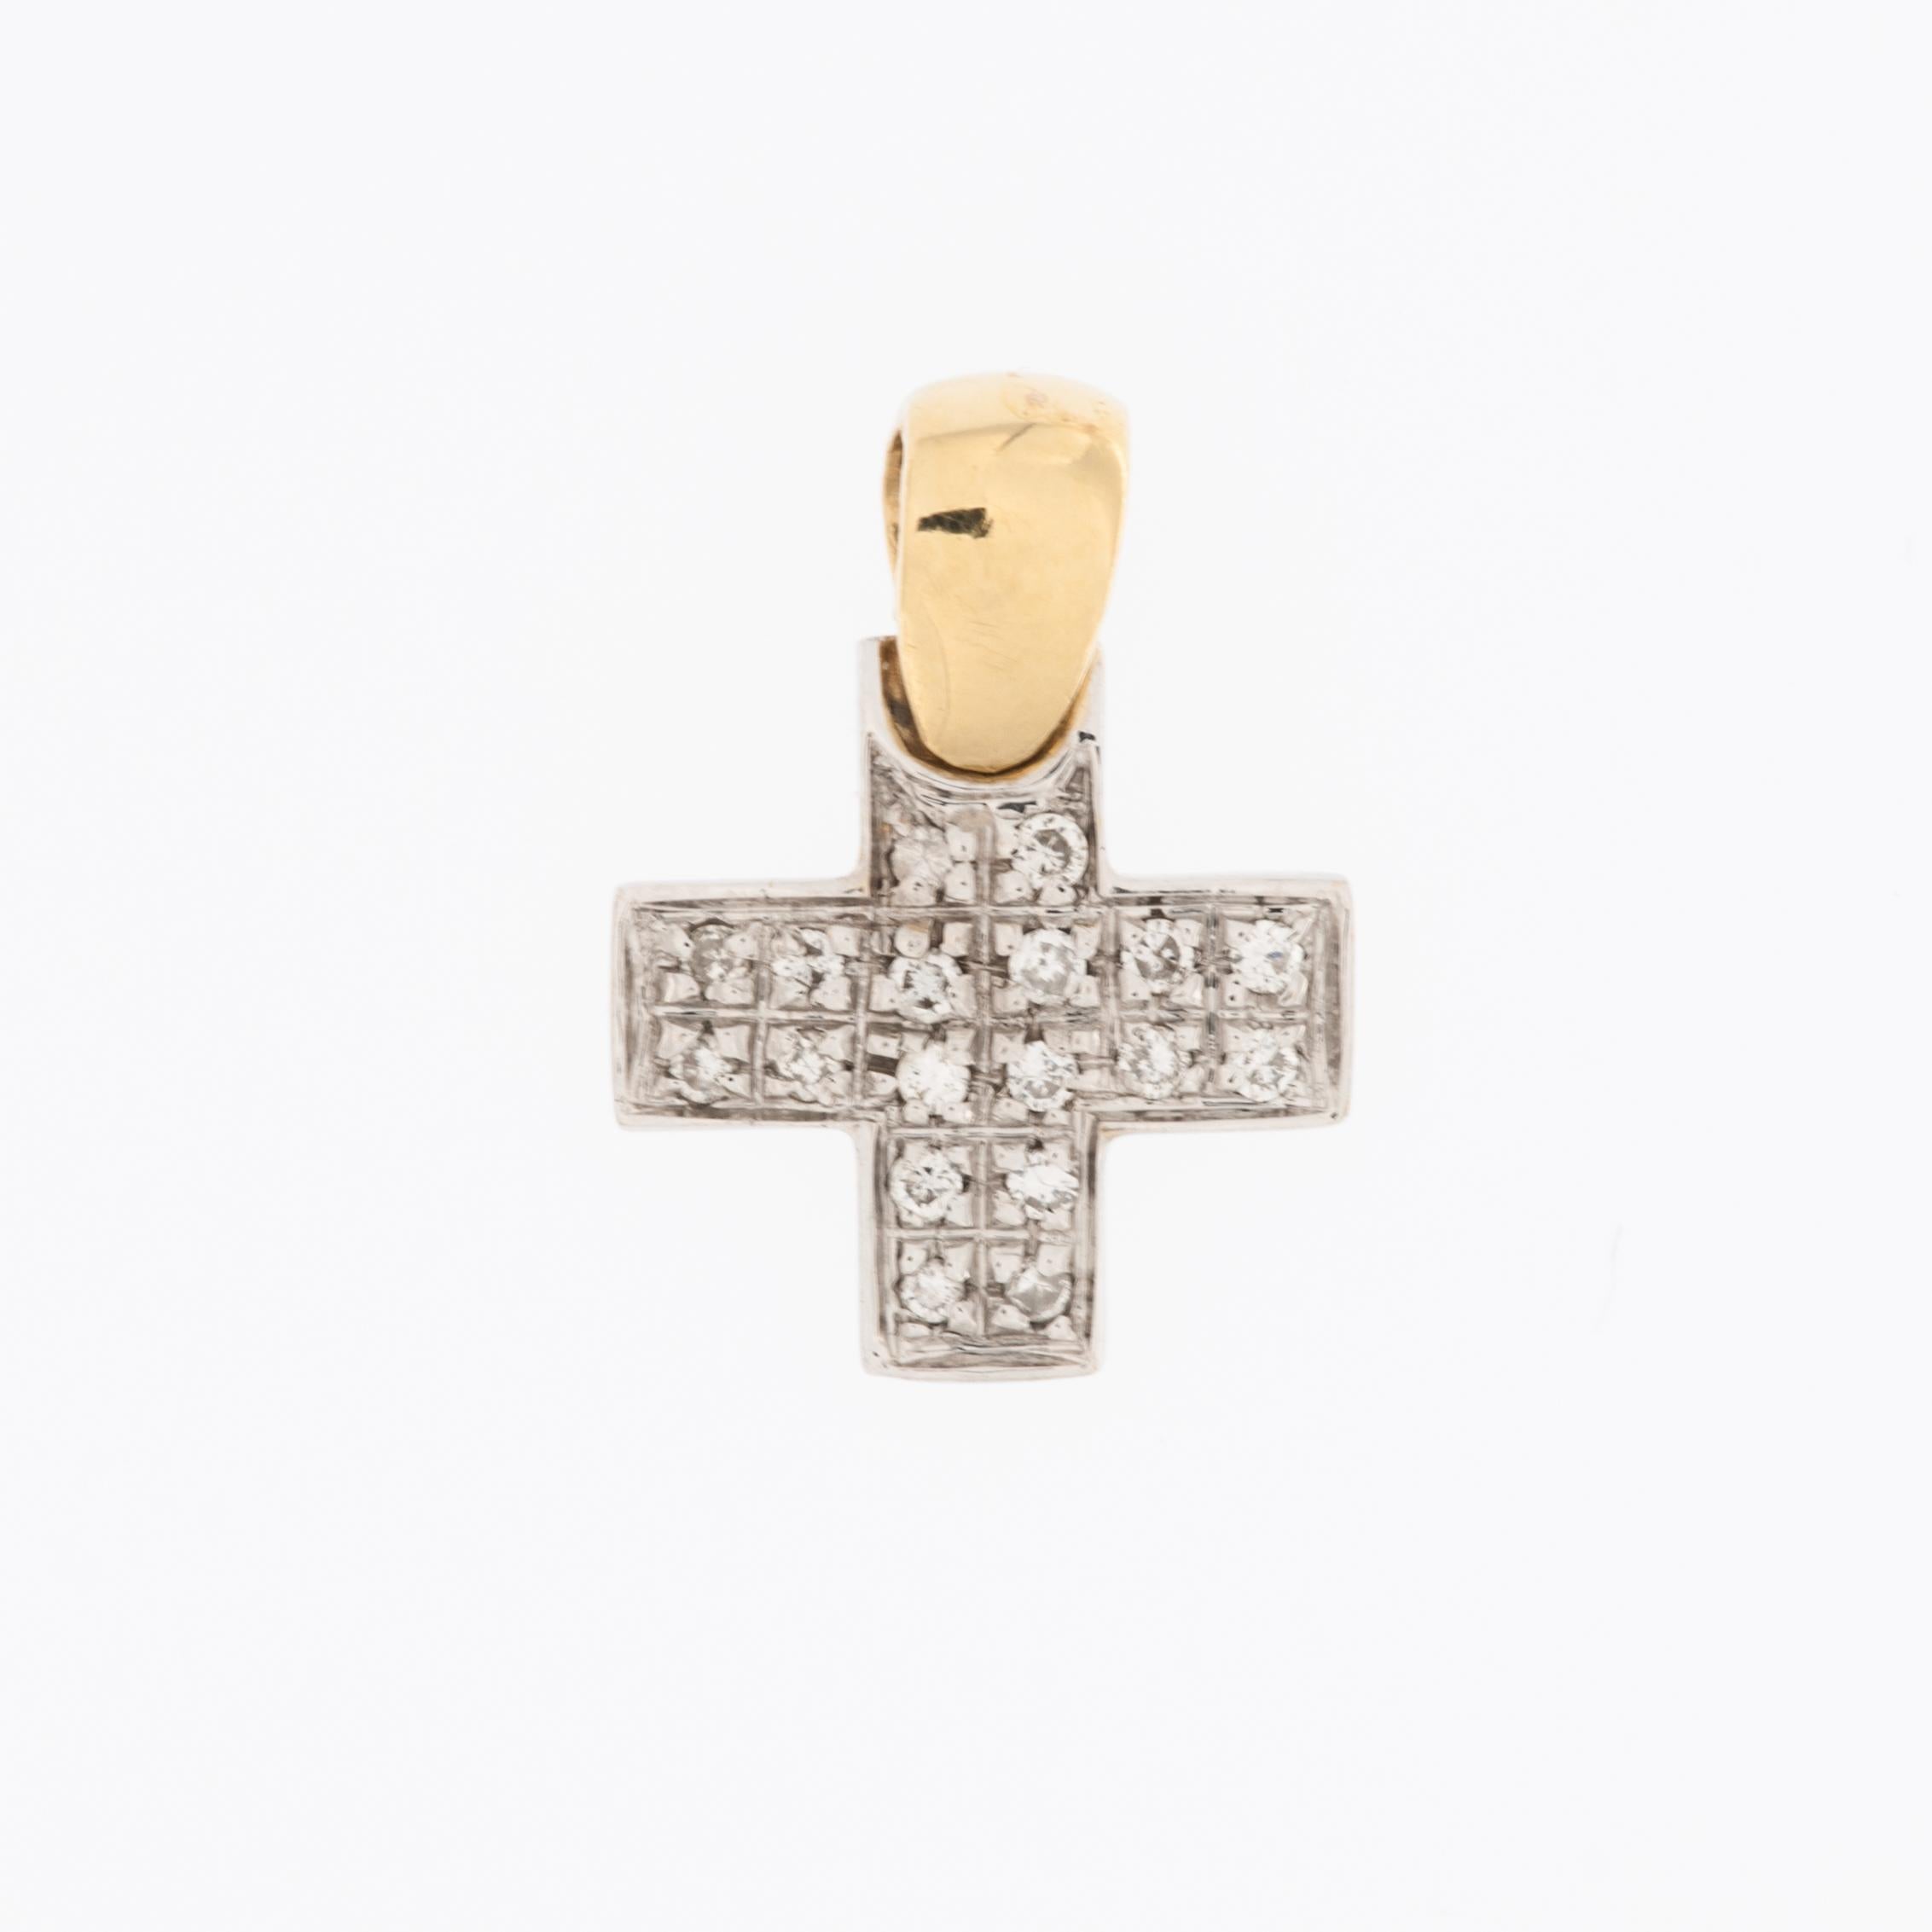 The Contemporary Italian Gold Cross with Diamonds combines traditional religious symbolism with modern design elements. 
The cross is designed in the classic Christian cross shape, a squared shape like the typical greek cross. 
The design is